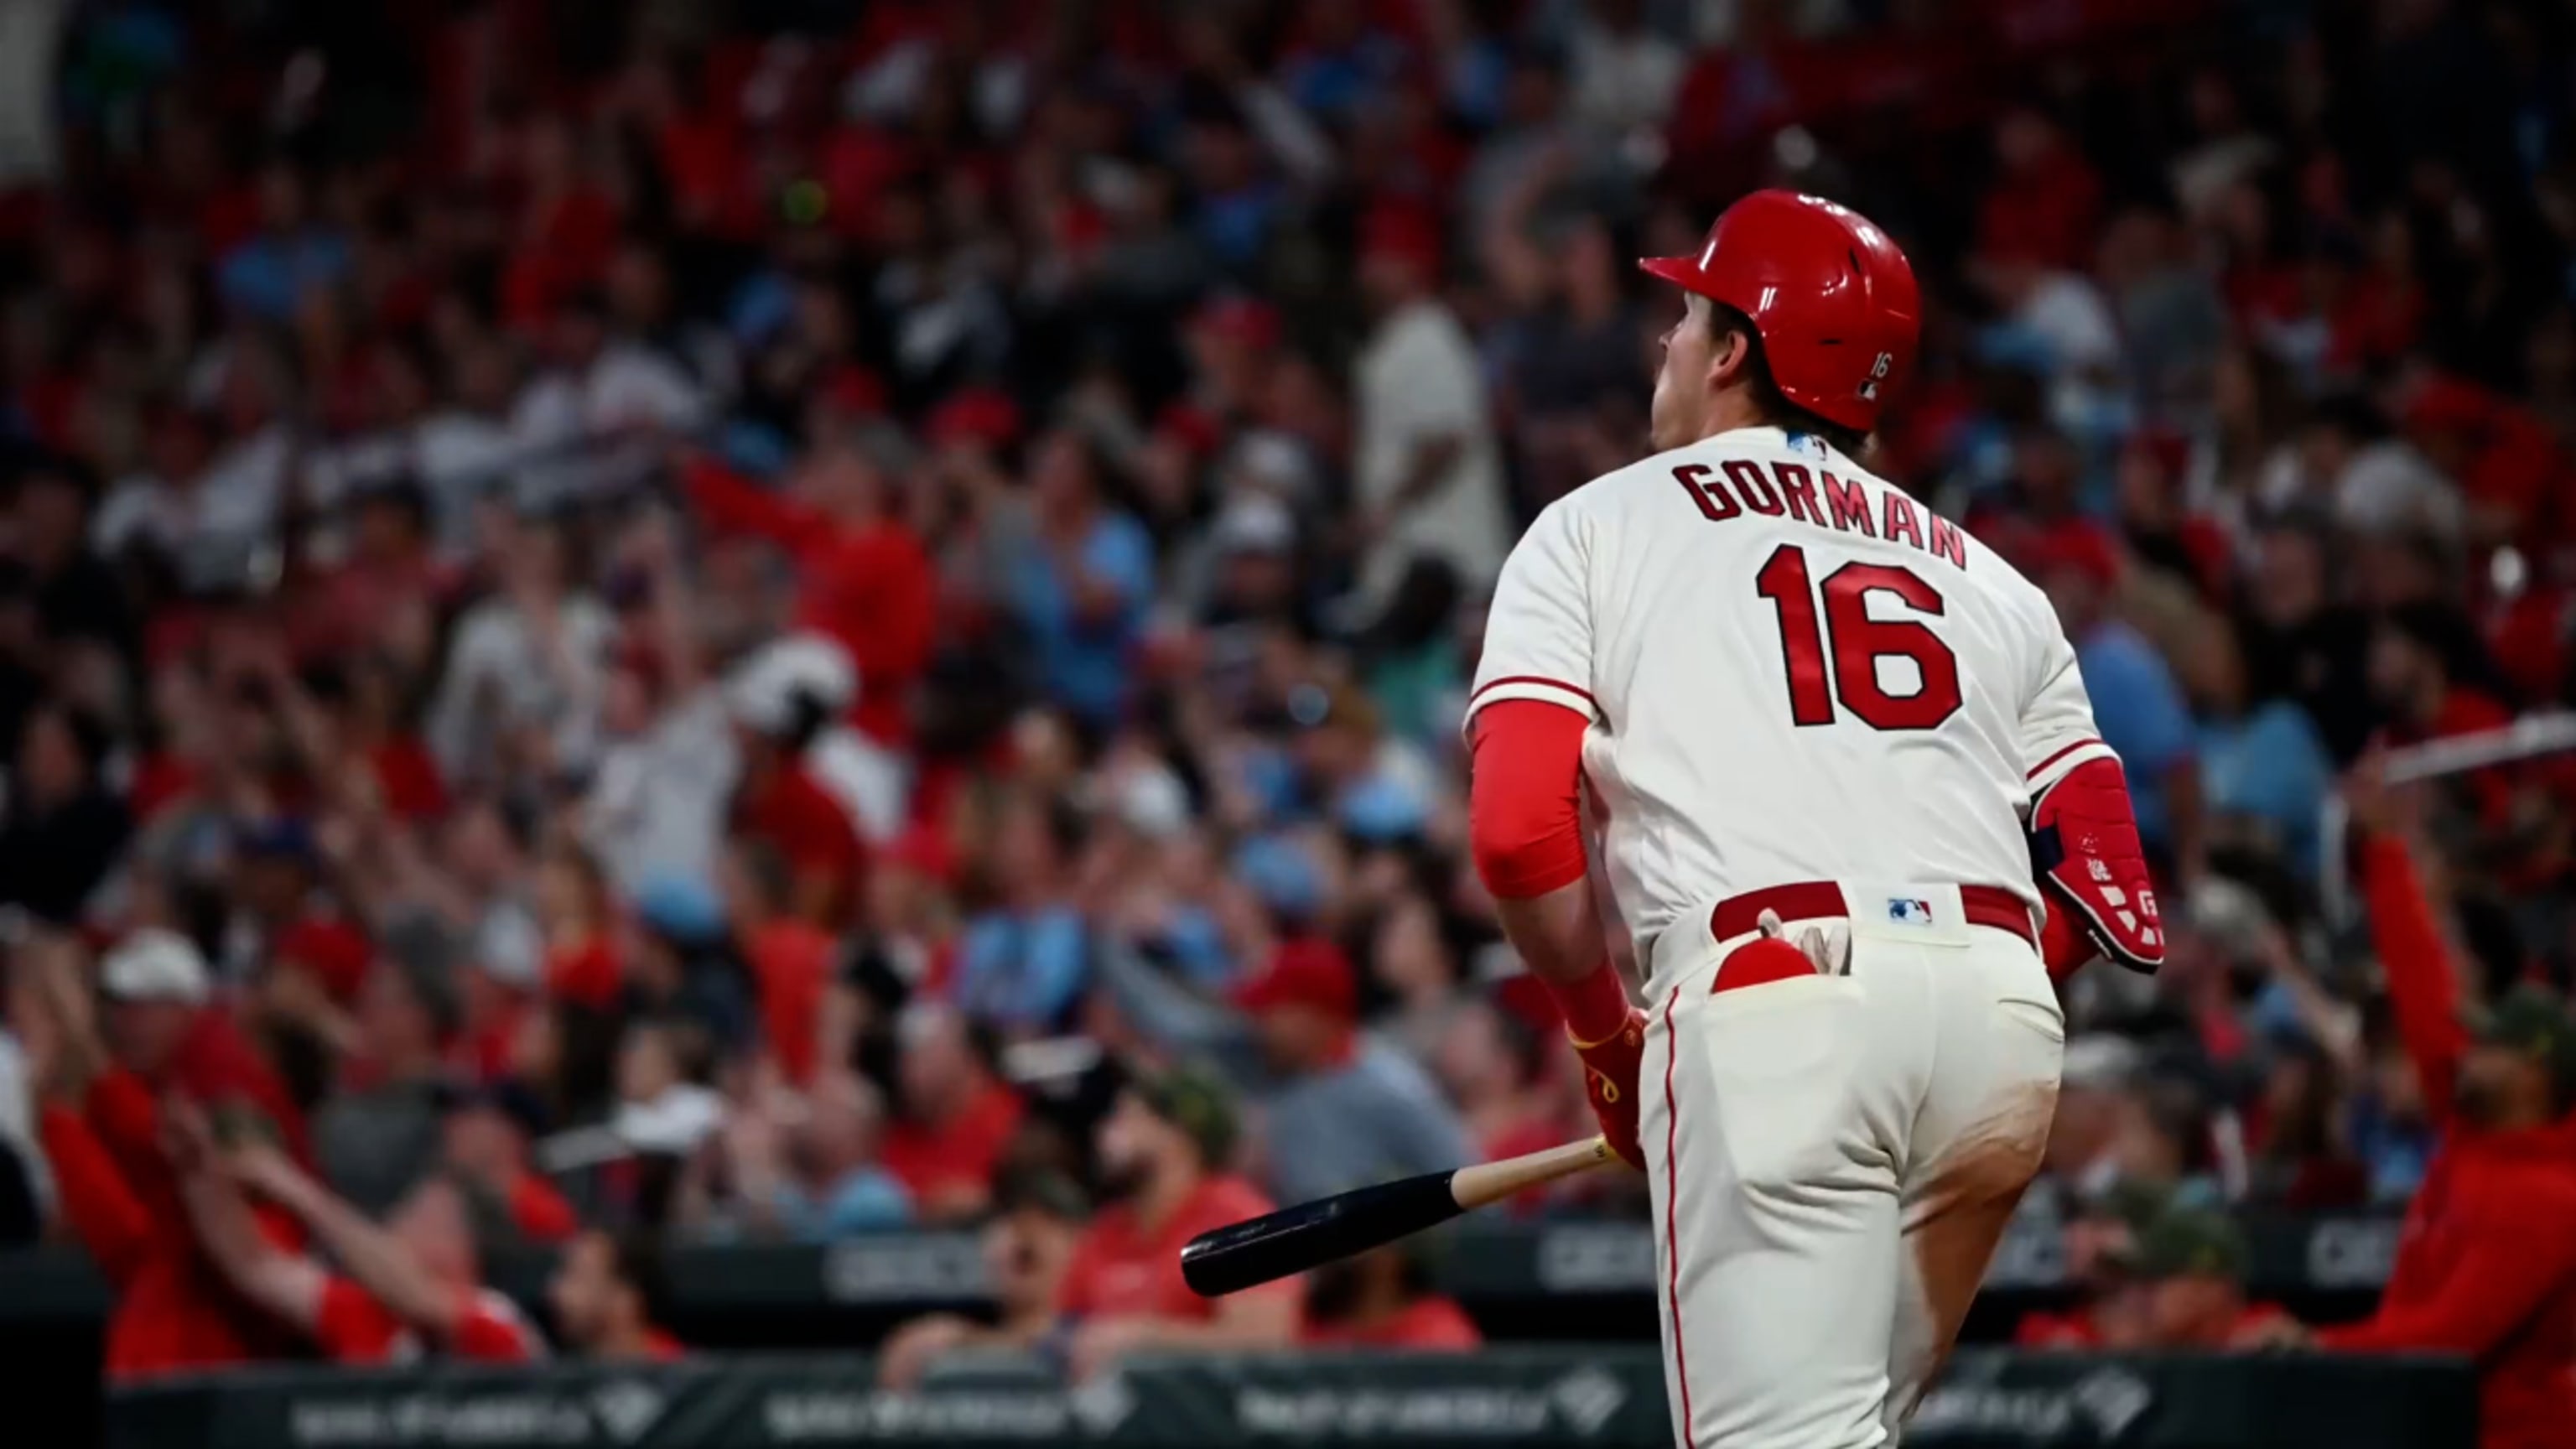 How Nolan Gorman became one of the best hitters in baseball